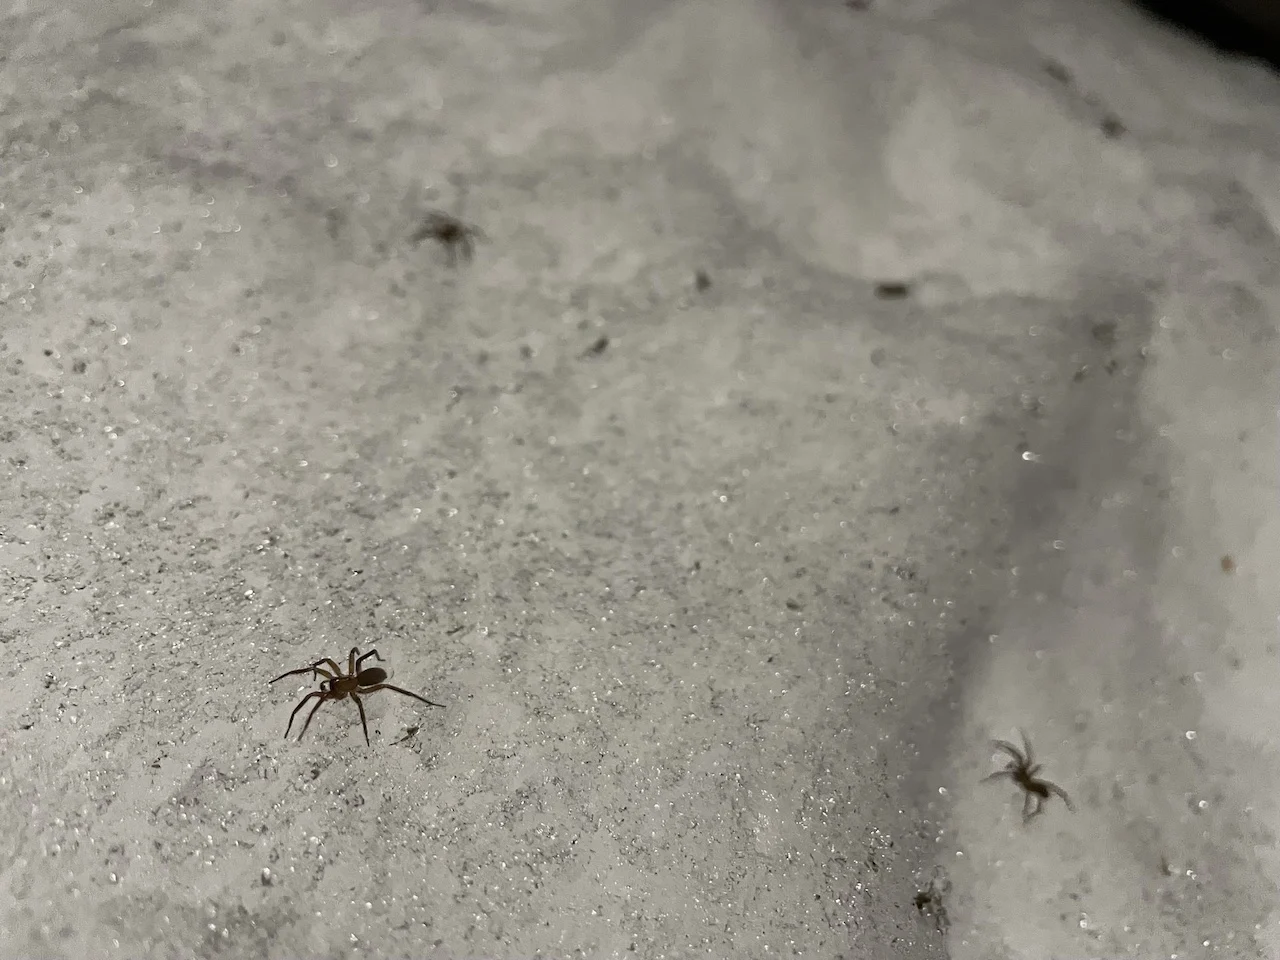 Weather may have had a role in creepy scenery of spiders on snowbank